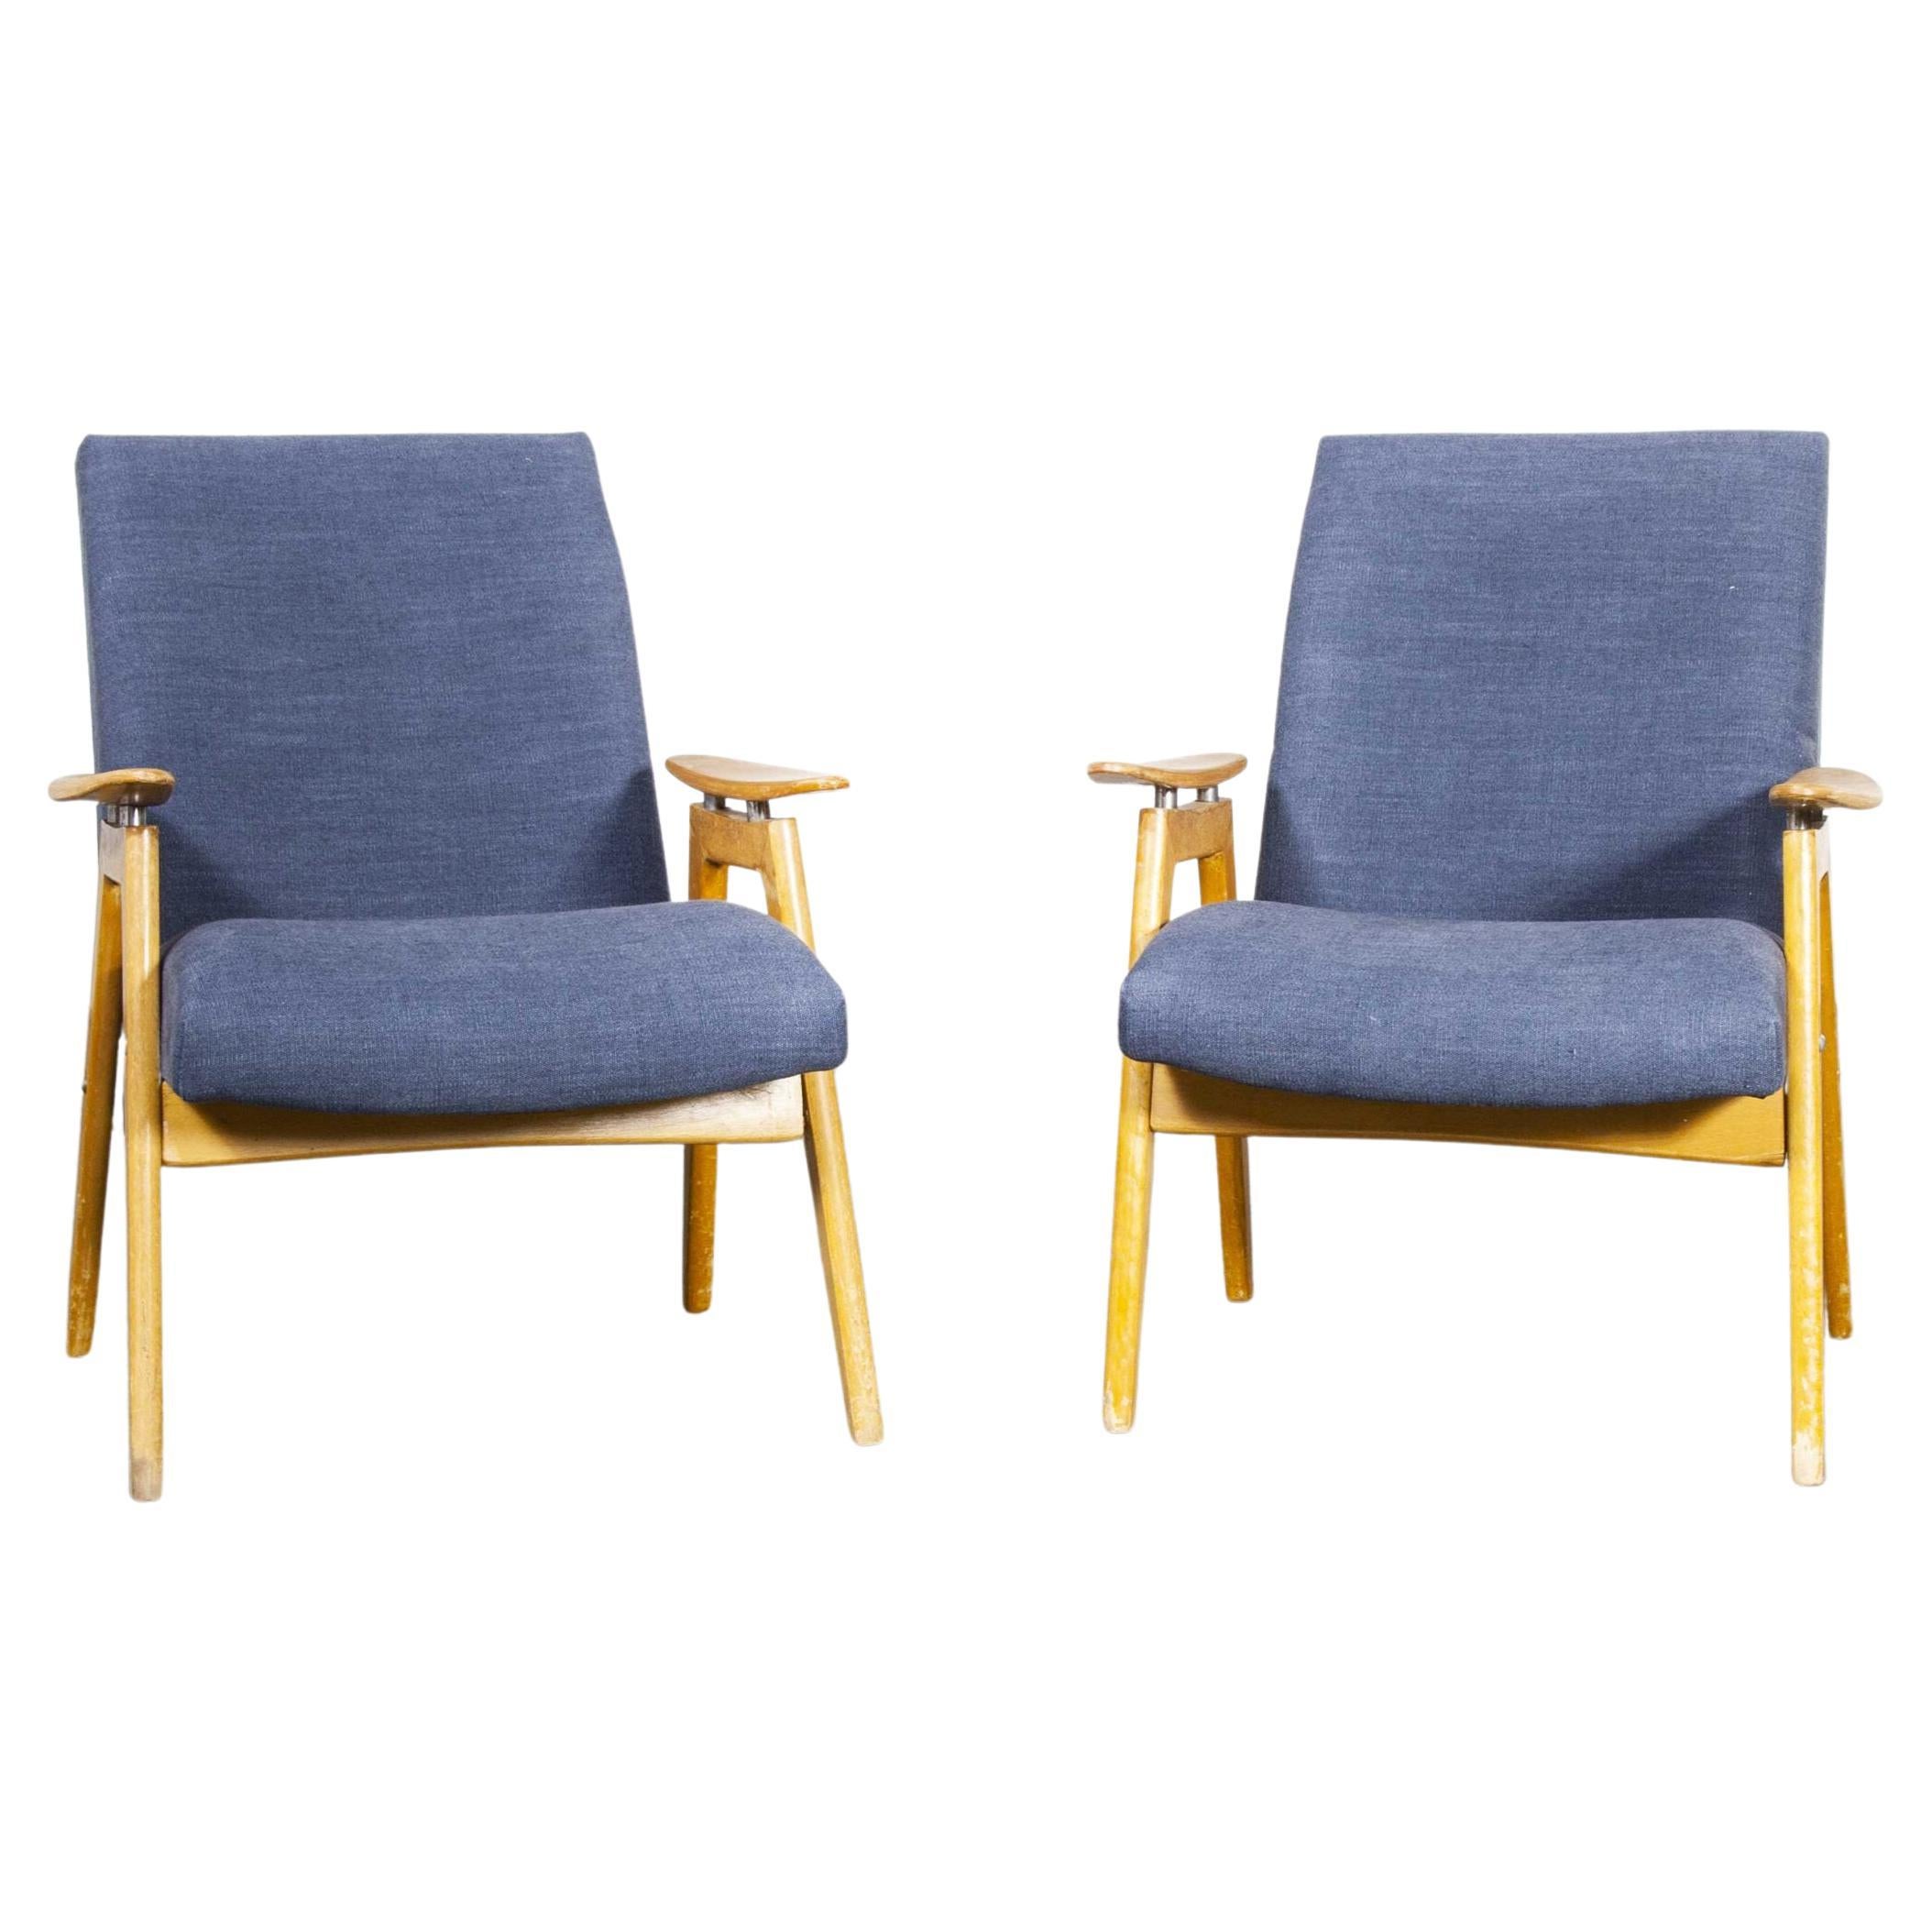 Mid Century Pair of Upholstered Armchairs with Straight Arms and Top Caps (Model For Sale